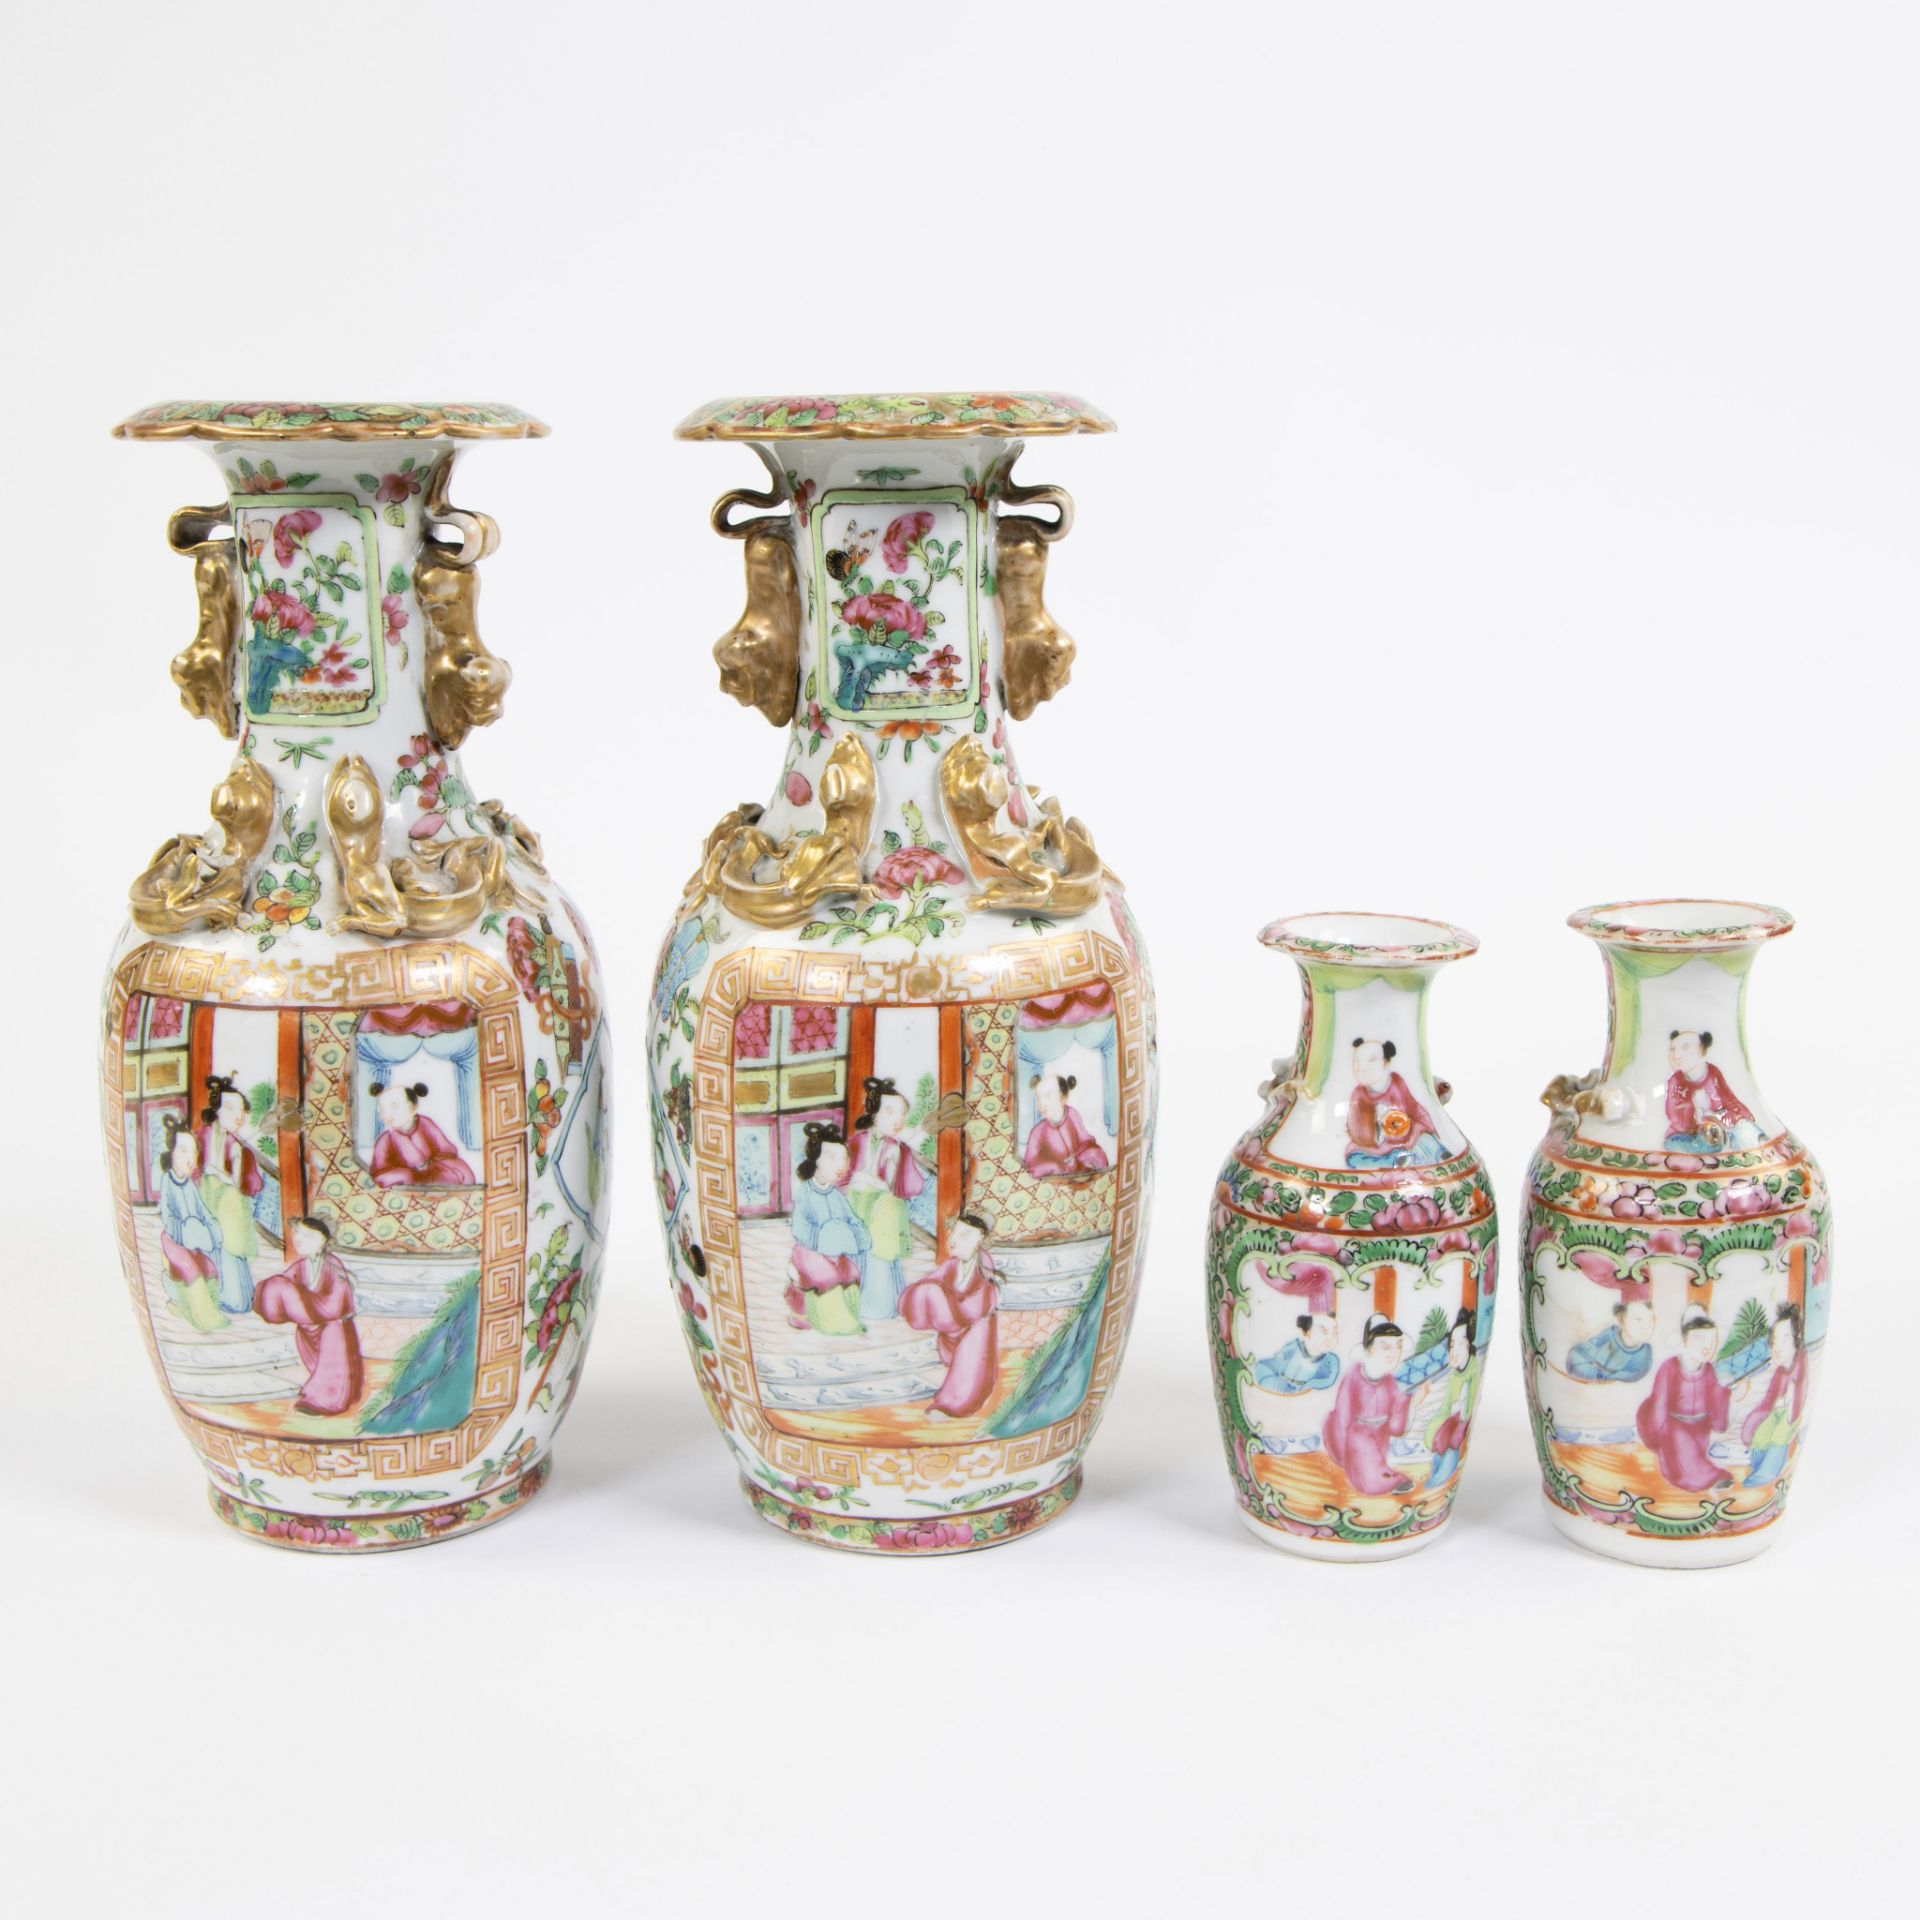 Two Canton porcelain vases and two smaller vases. Decorated in famille rose enamels enhanced with go